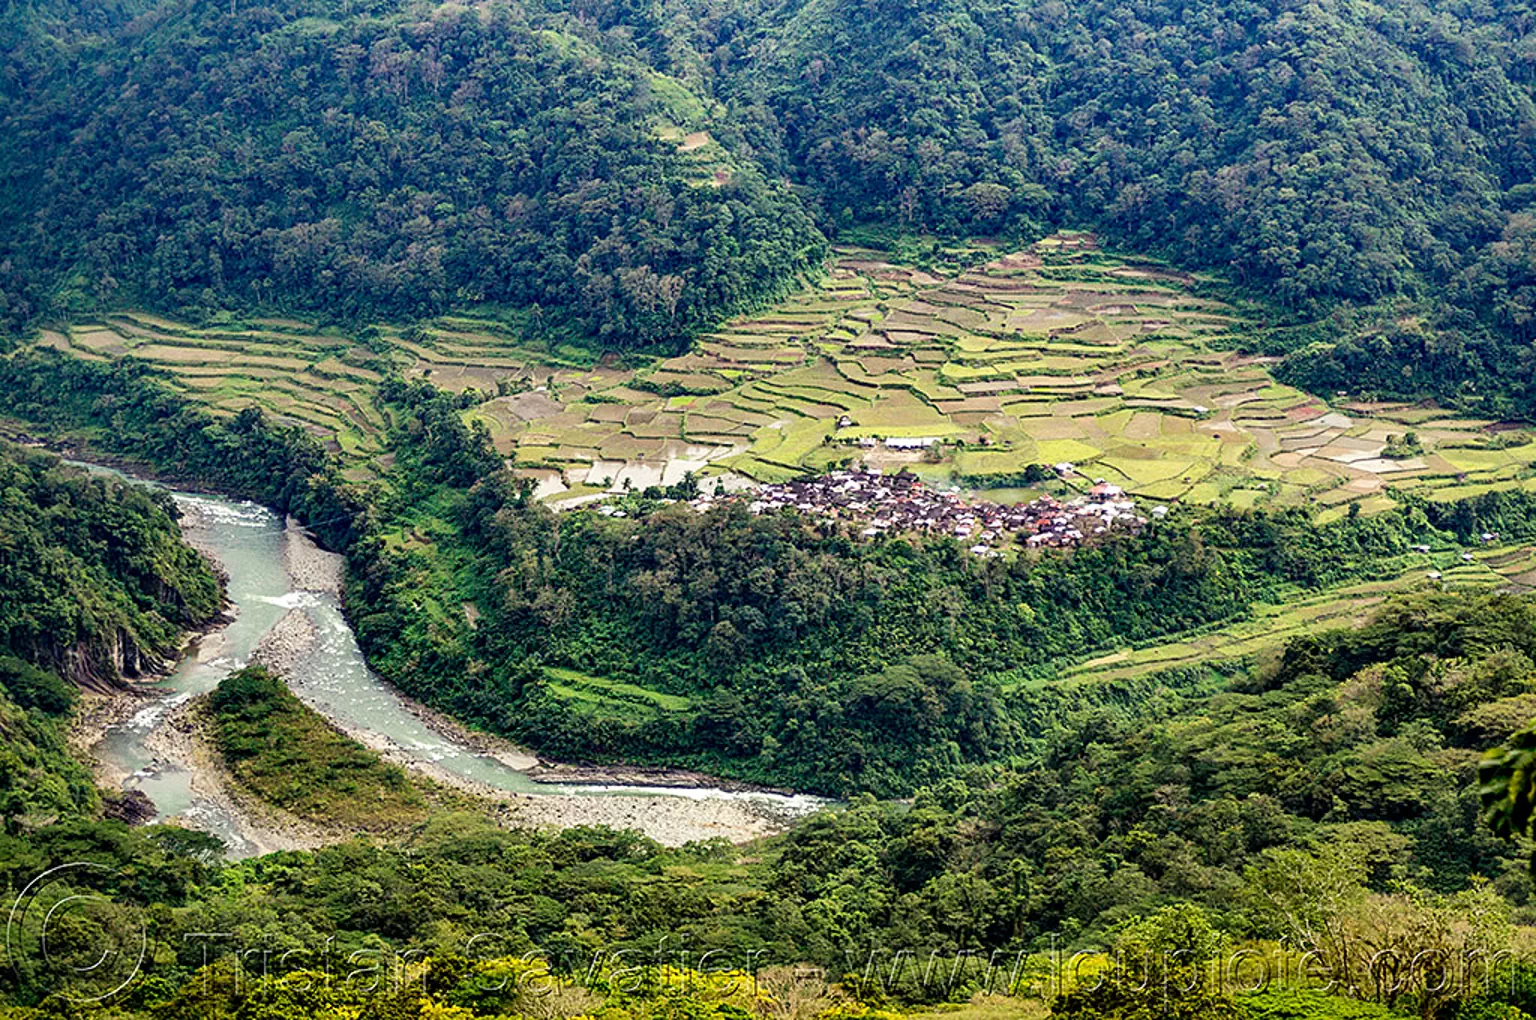 village and terraced fields in chico valley (philippines), agriculture, chico river, chico valley, cordillera, jungle, philippines, rice paddies, rice paddy fields, river bend, terrace farming, terraced fields, village